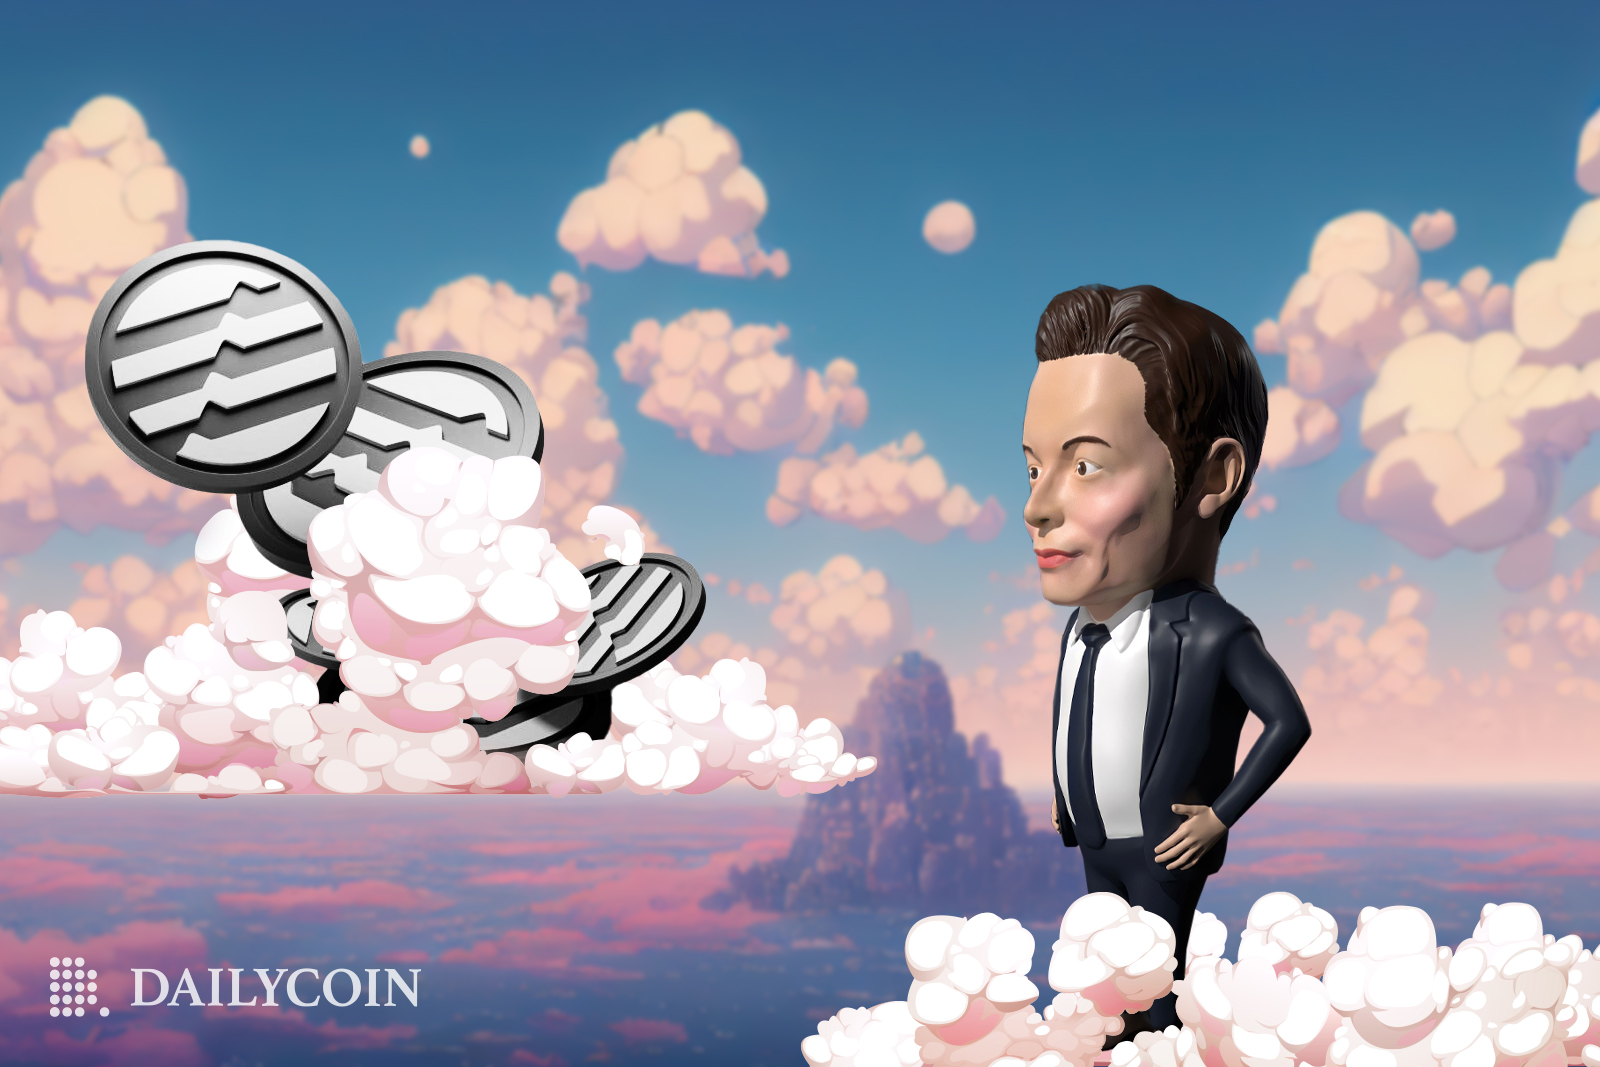 Elon Musk figurine standing above the clouds and staring at floating Aptos tokens.